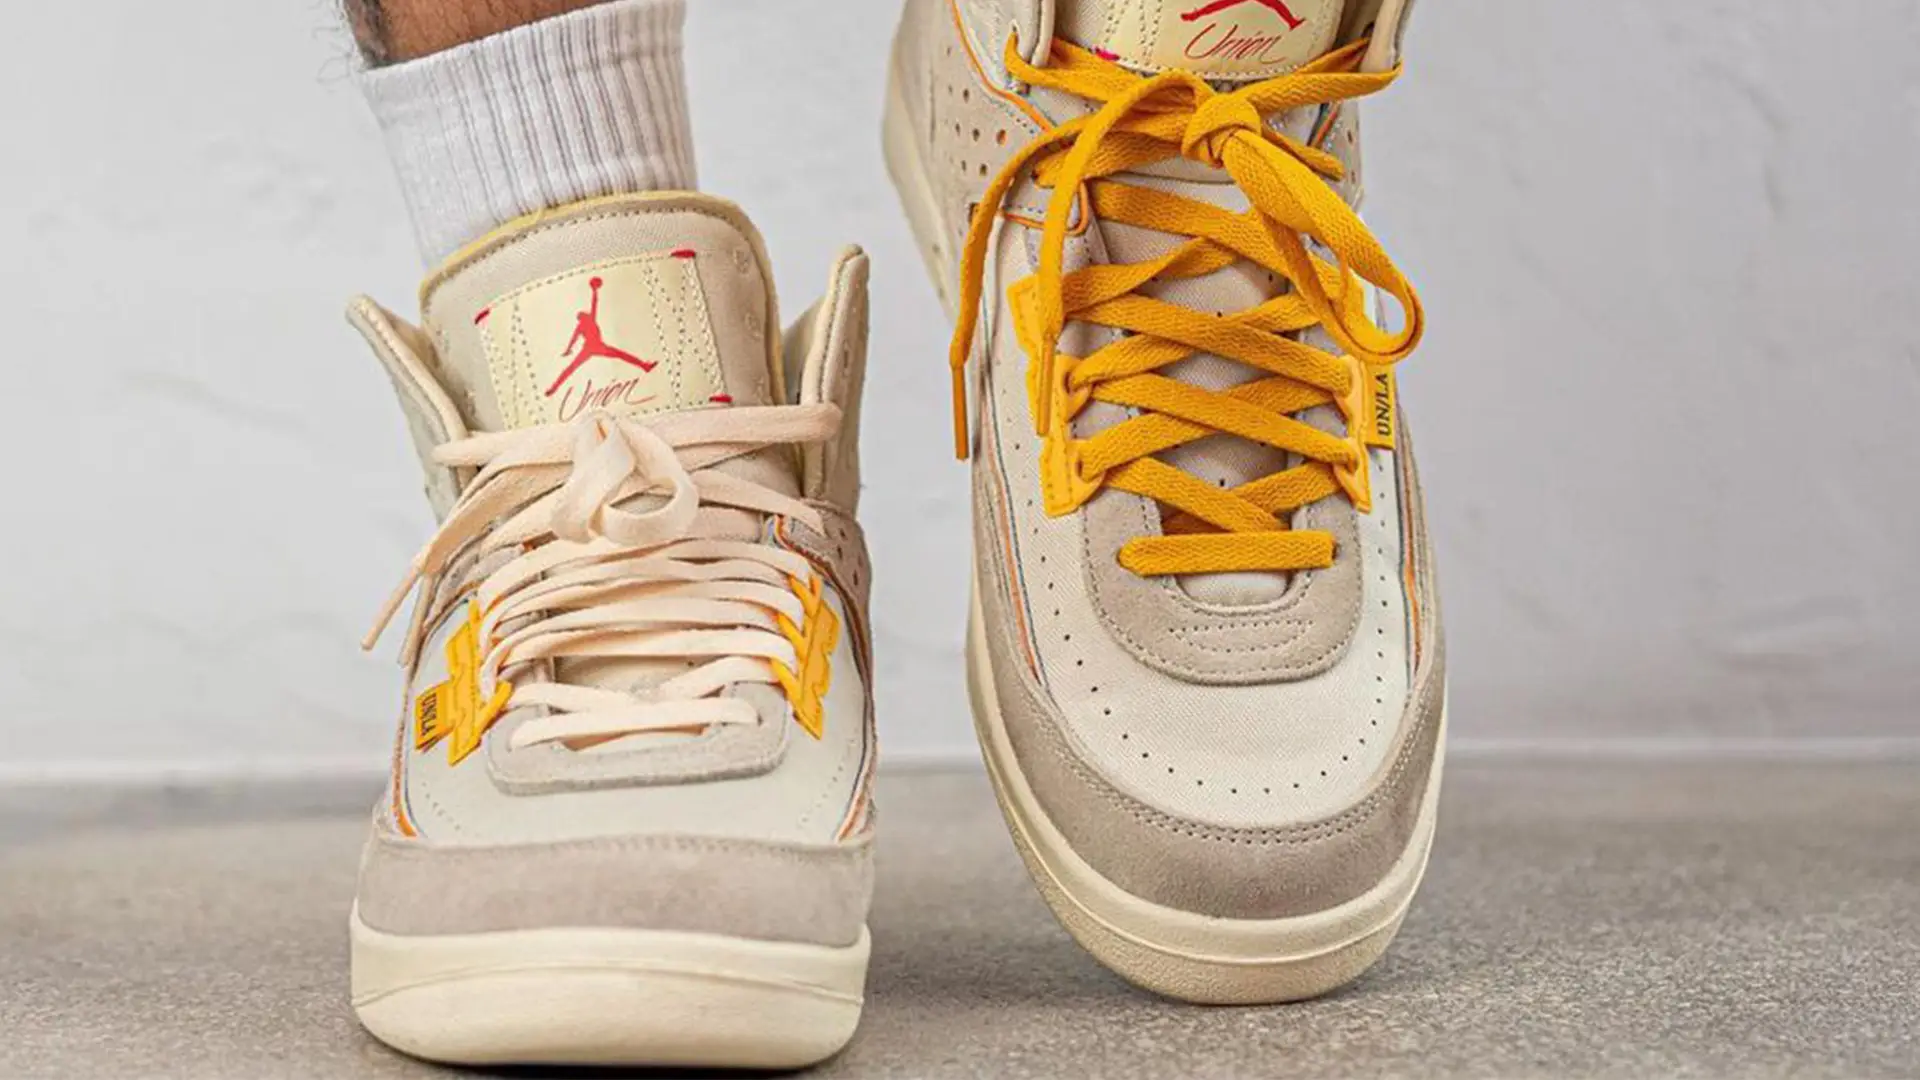 Here's a Better Look at the Union LA x Air Jordan 2 